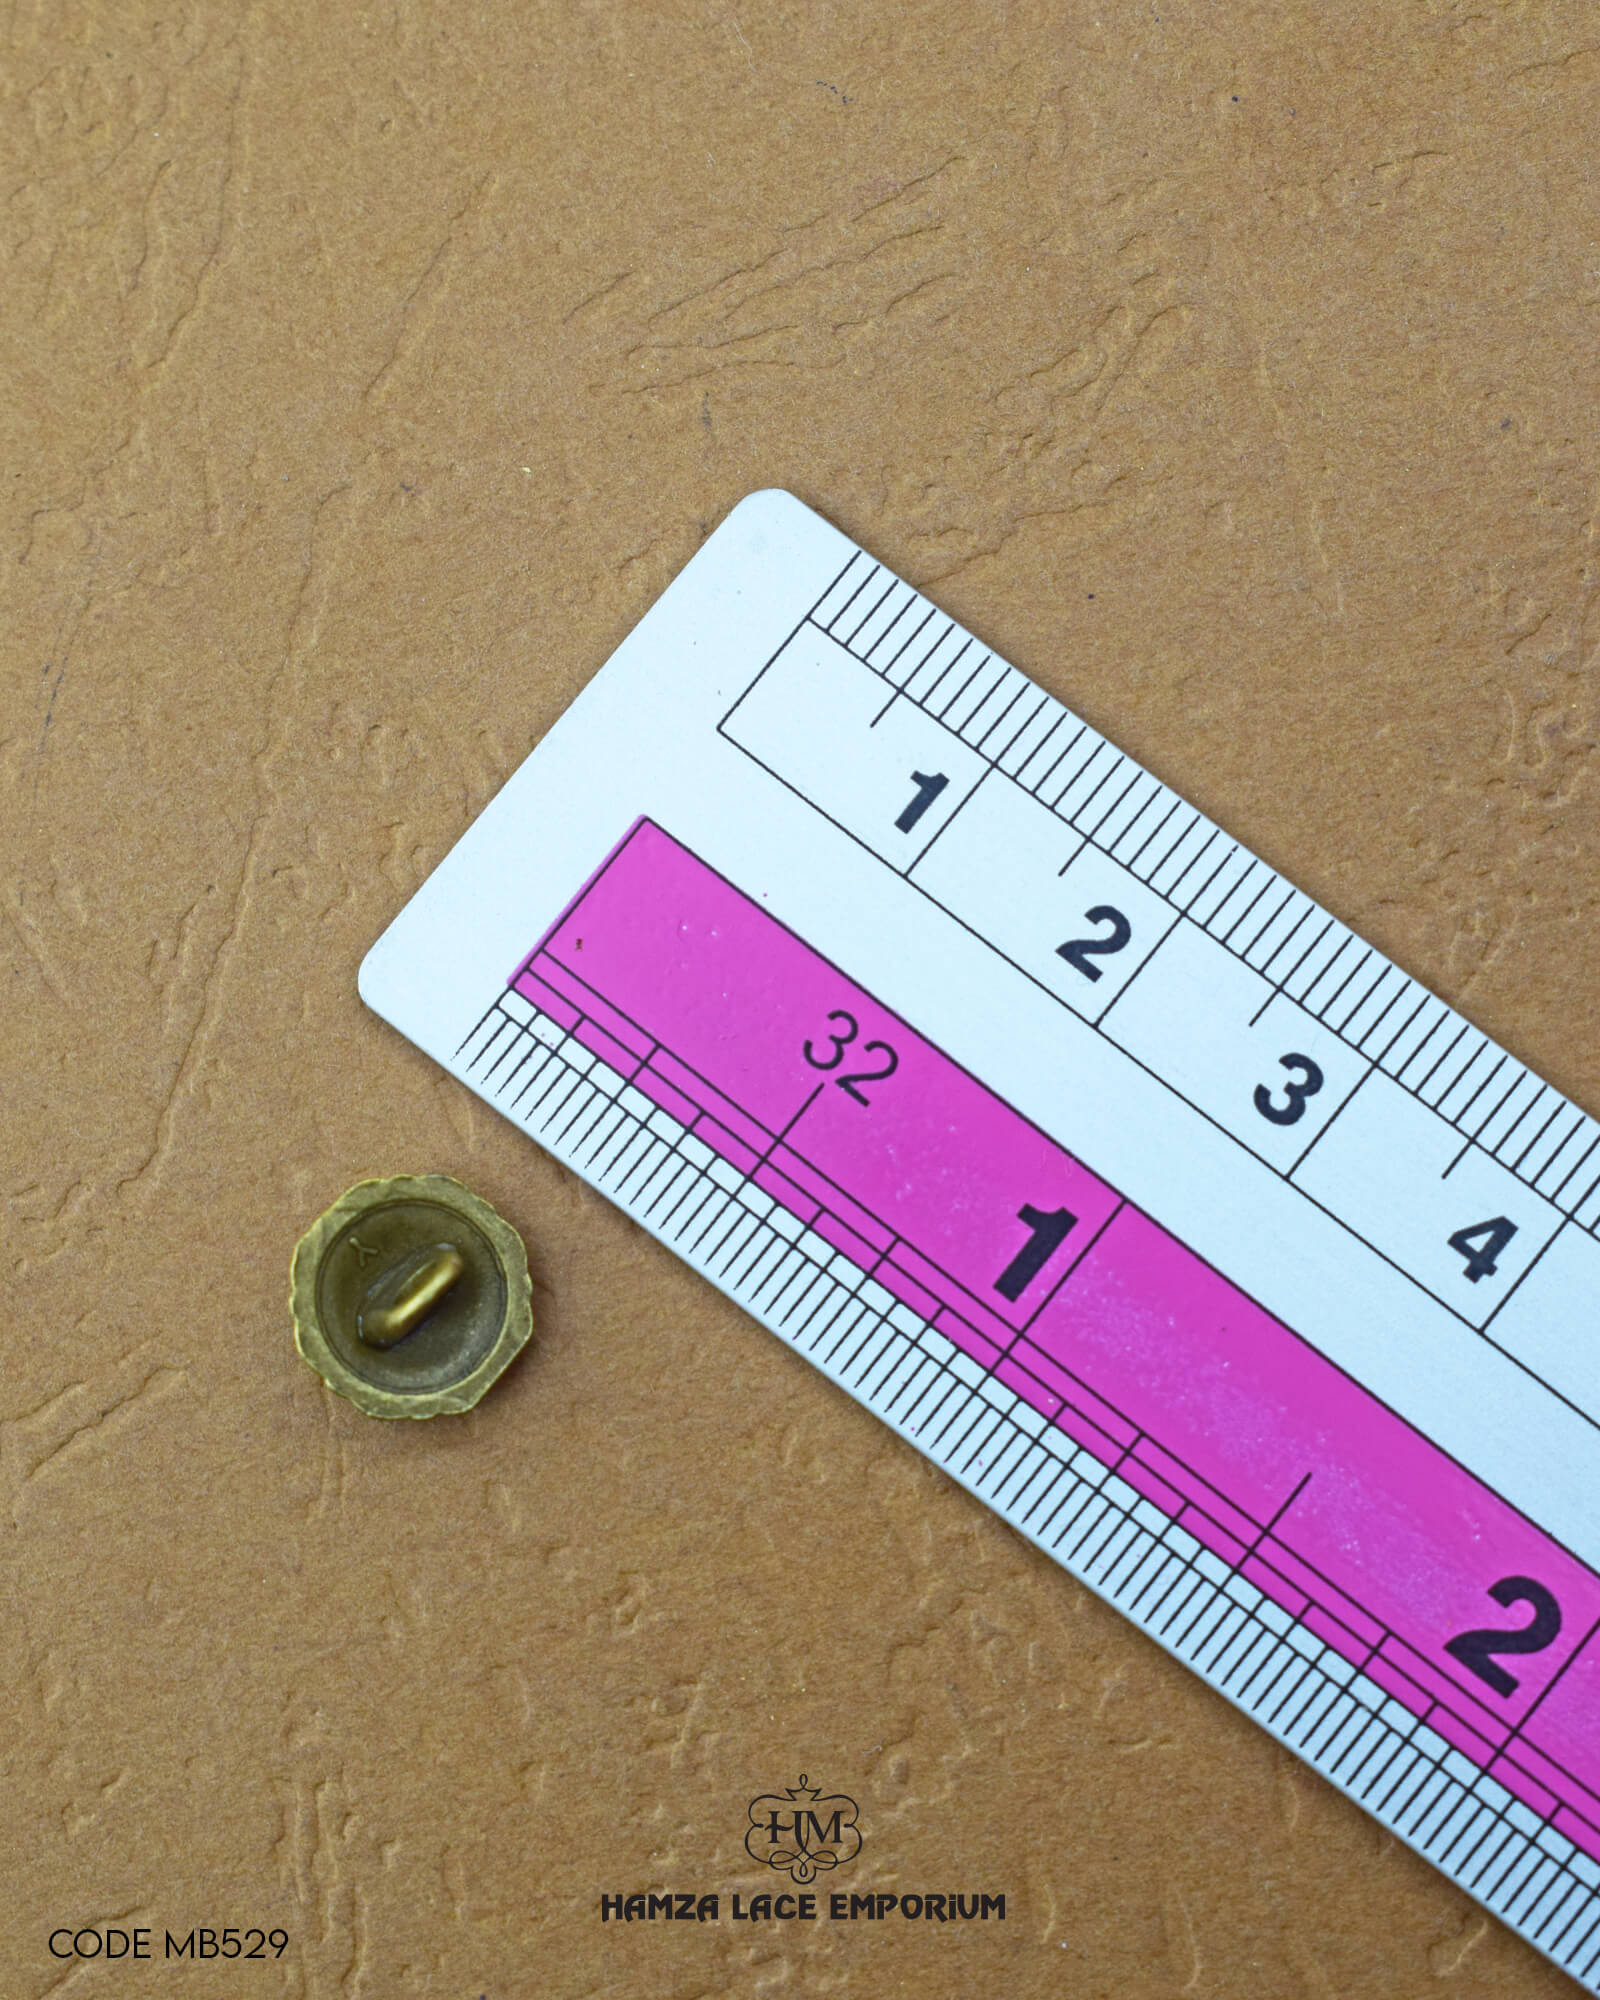 Size of the 'Antique Metal Button MB529' is given with the help of a ruler